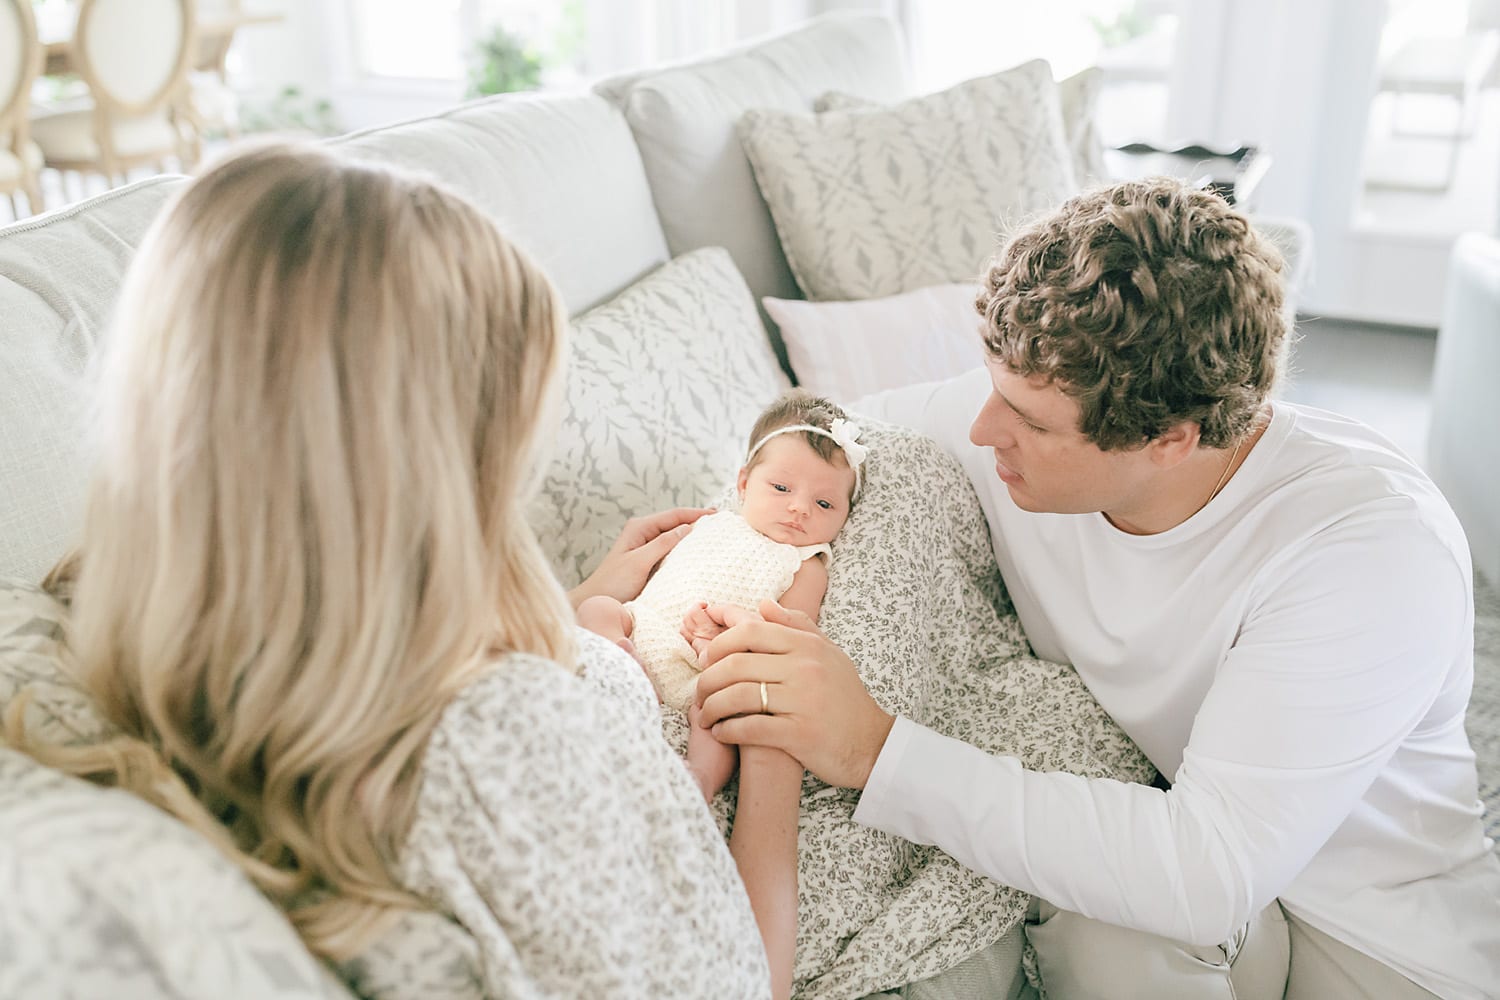 new parents admiring their newborn baby girl when sitting on their couch